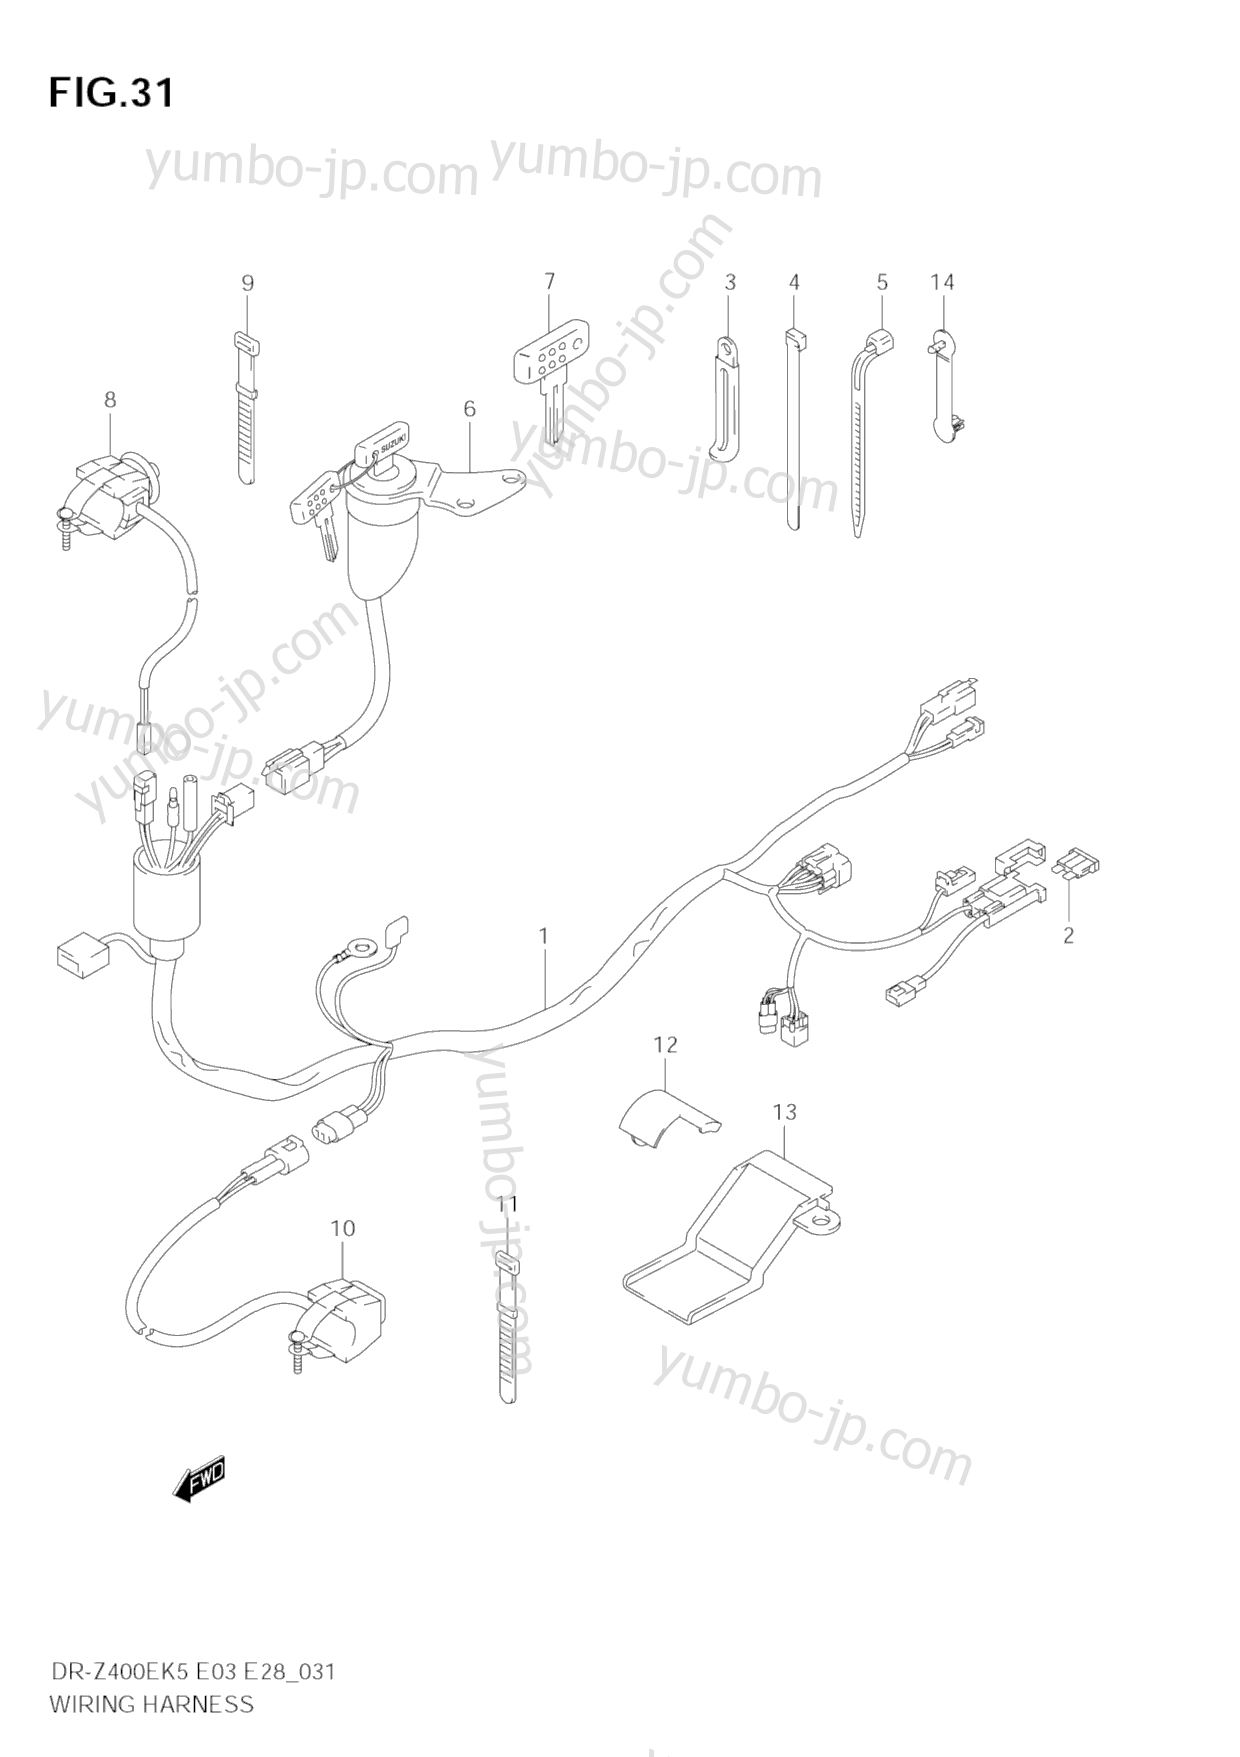 WIRING HARNESS for motorcycles SUZUKI DR-Z400E 2006 year